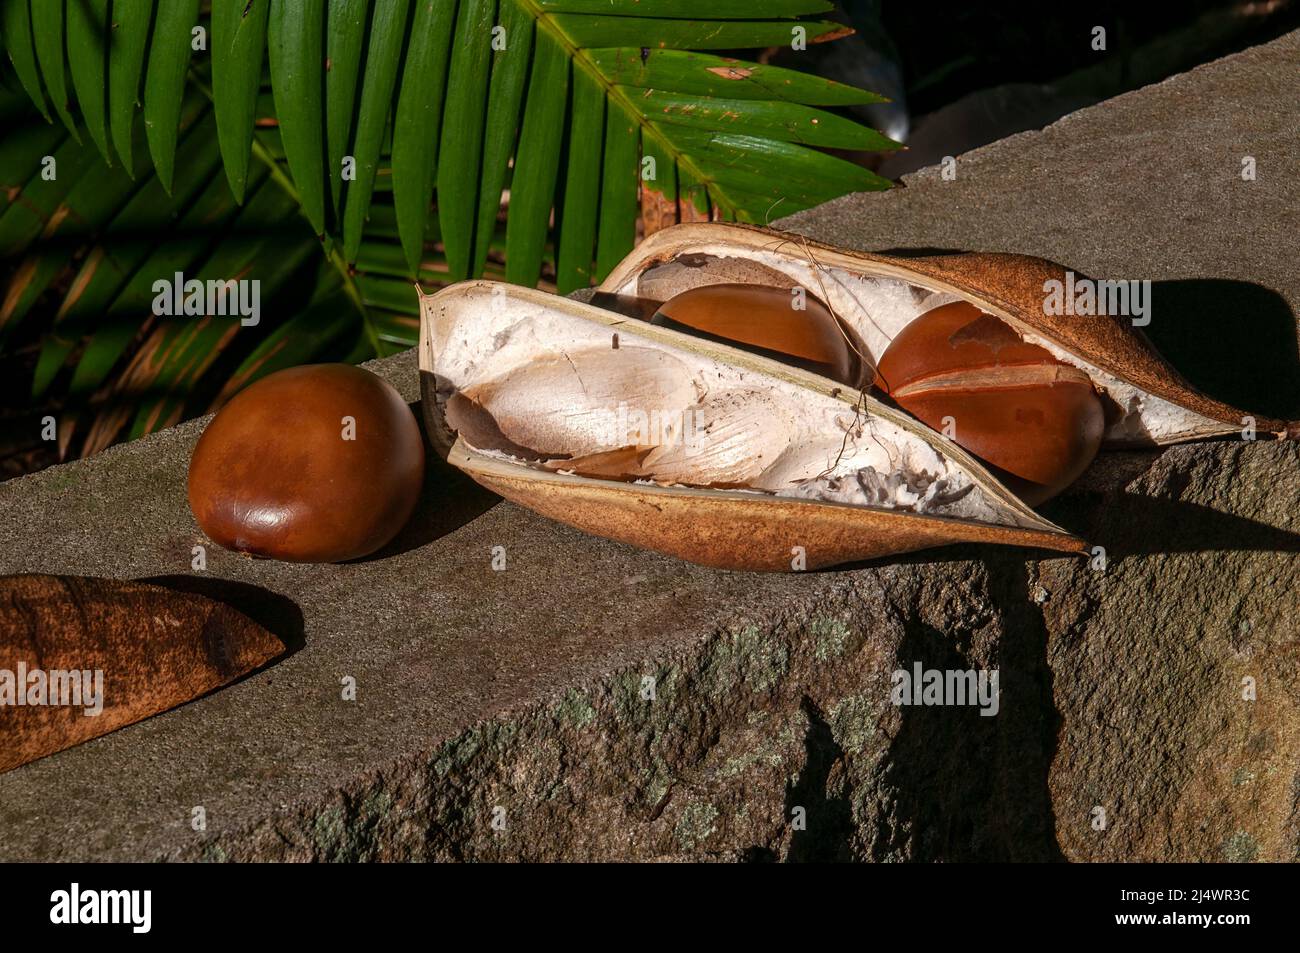 Sydney Australia, open seed pod of a moreton bay chestnut or blackbean native to the east coast of Australia in Queensland and New South Wales. Stock Photo